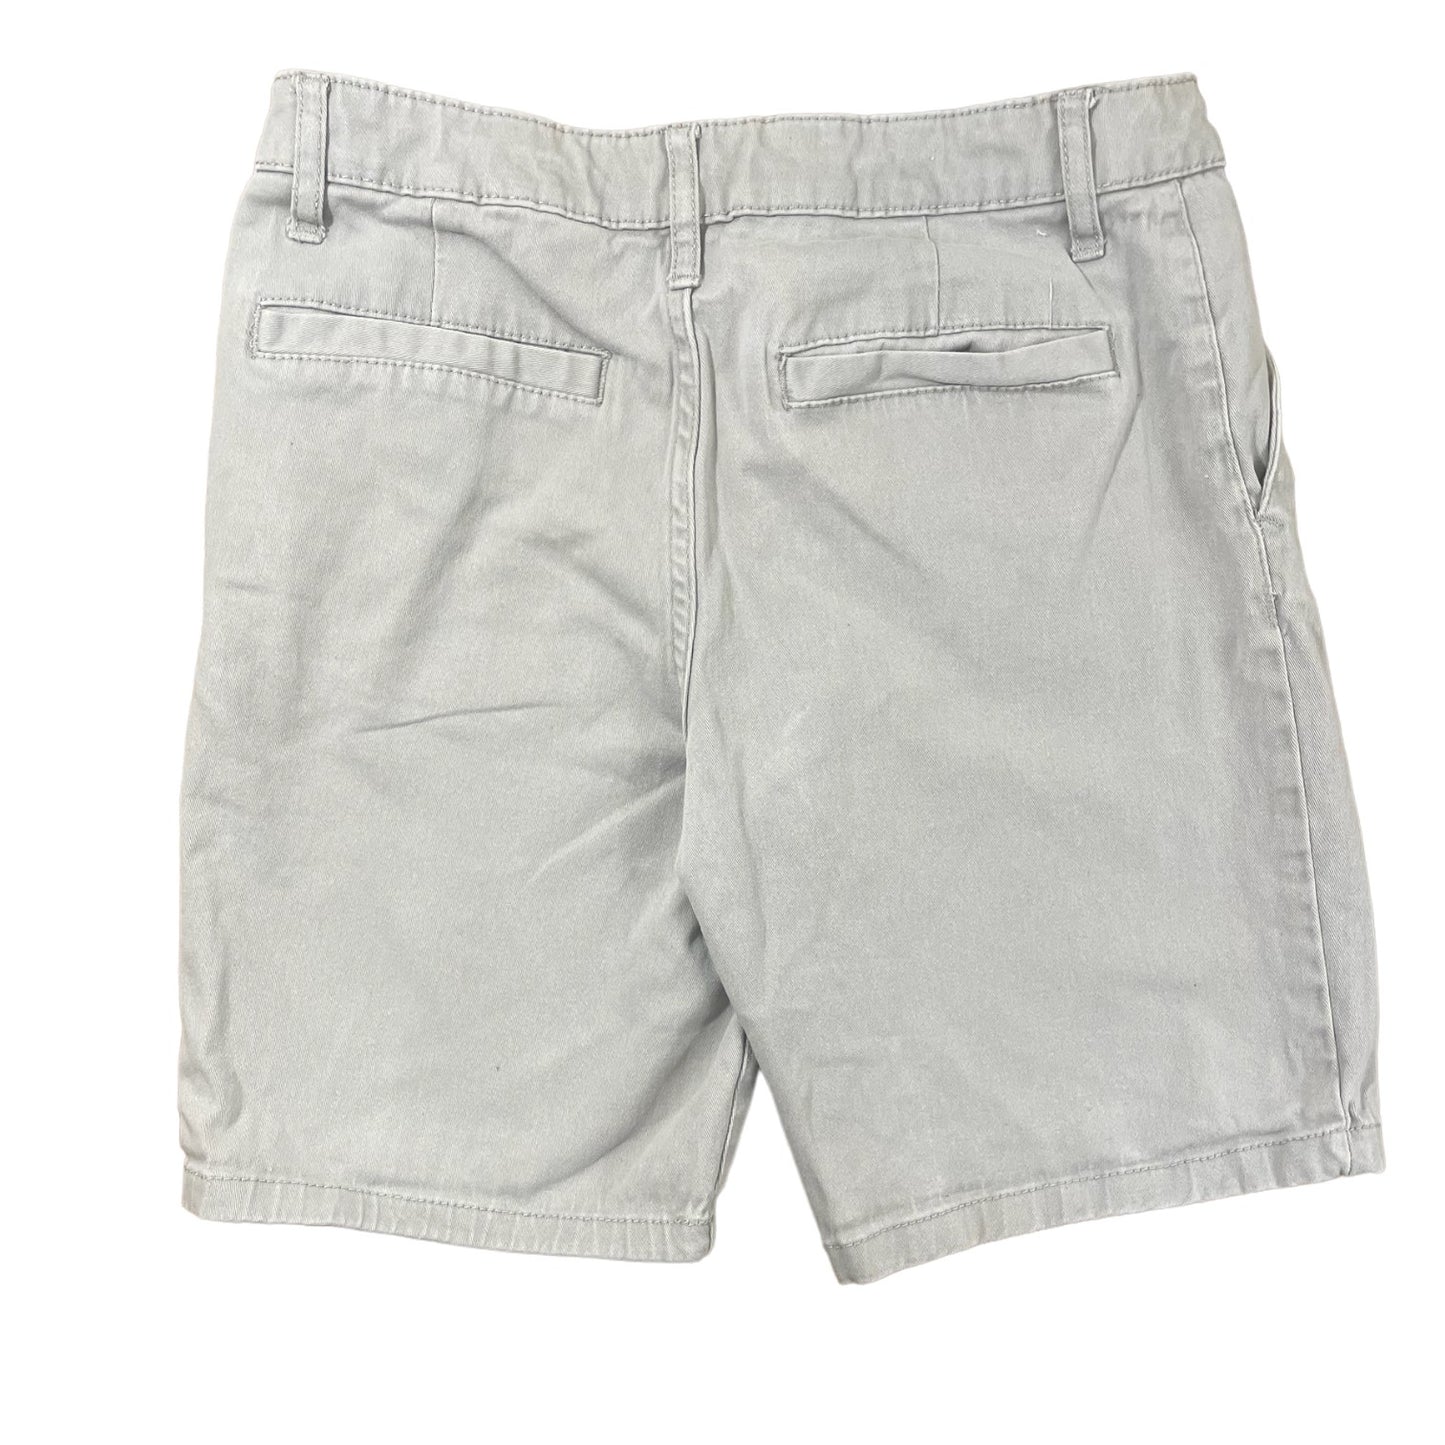 RSQ Chino Shorts Boys Large size 10-12